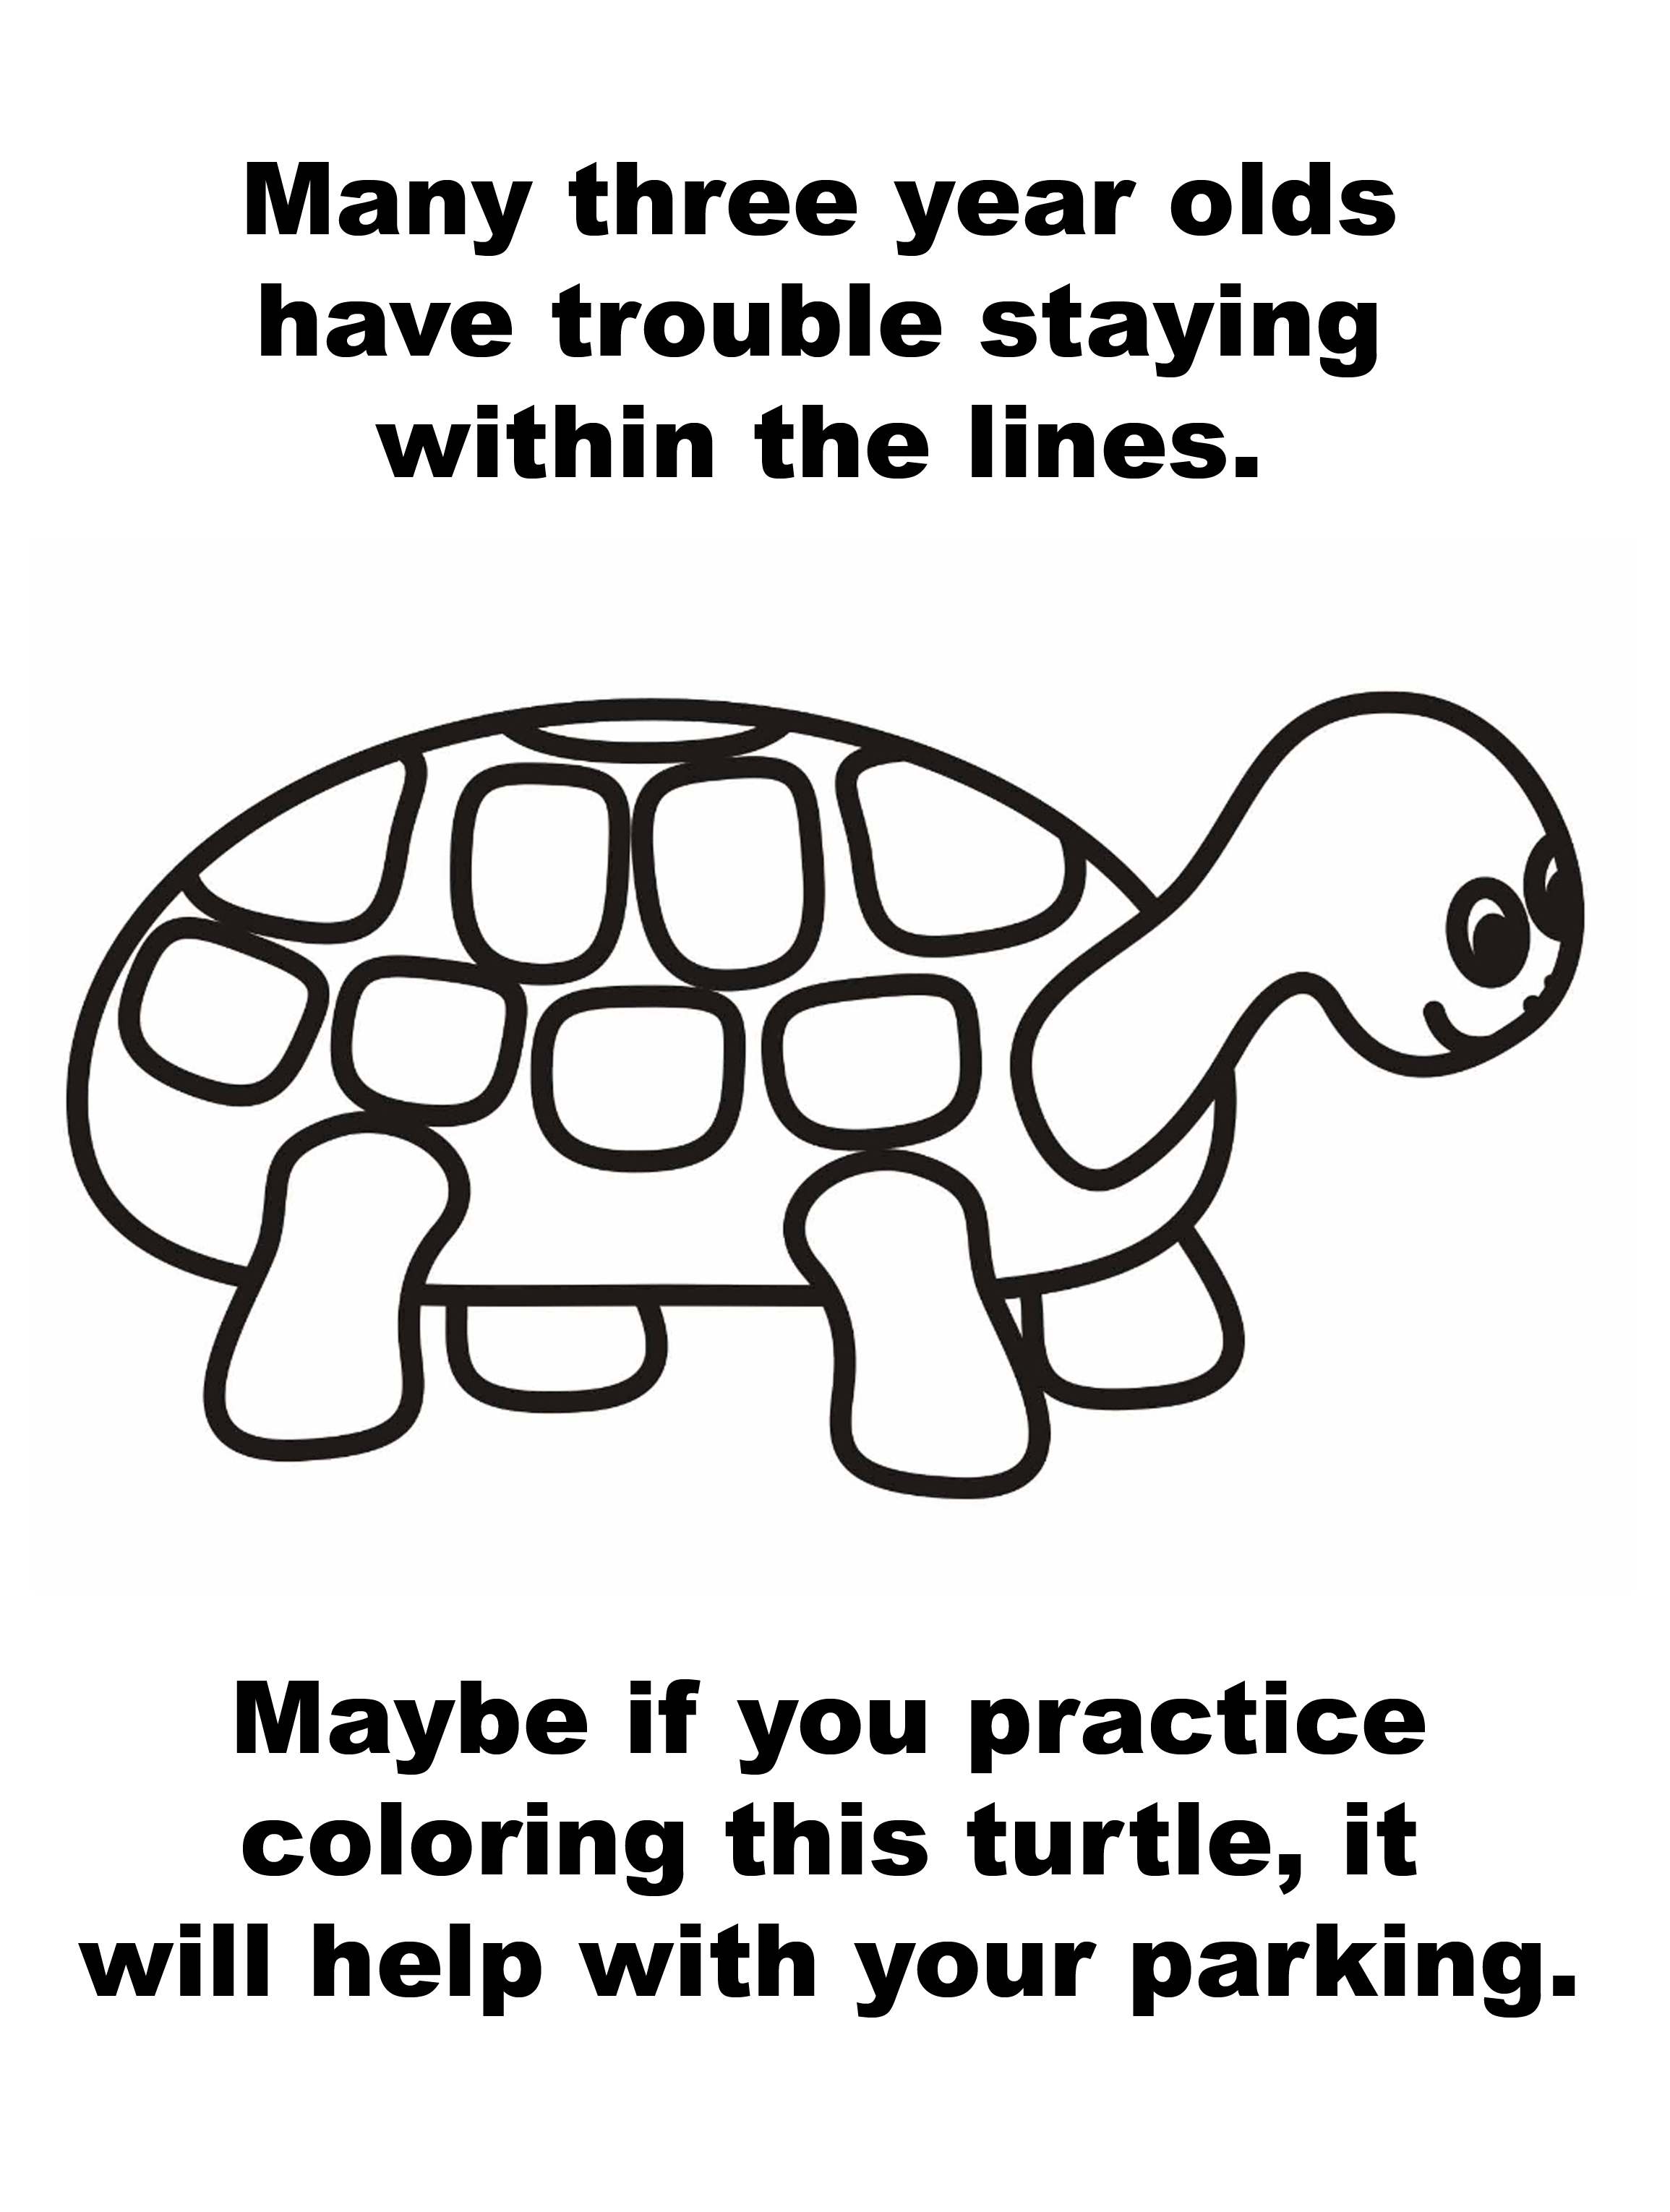 parking-ticket-turtle-coloring-line-3.png